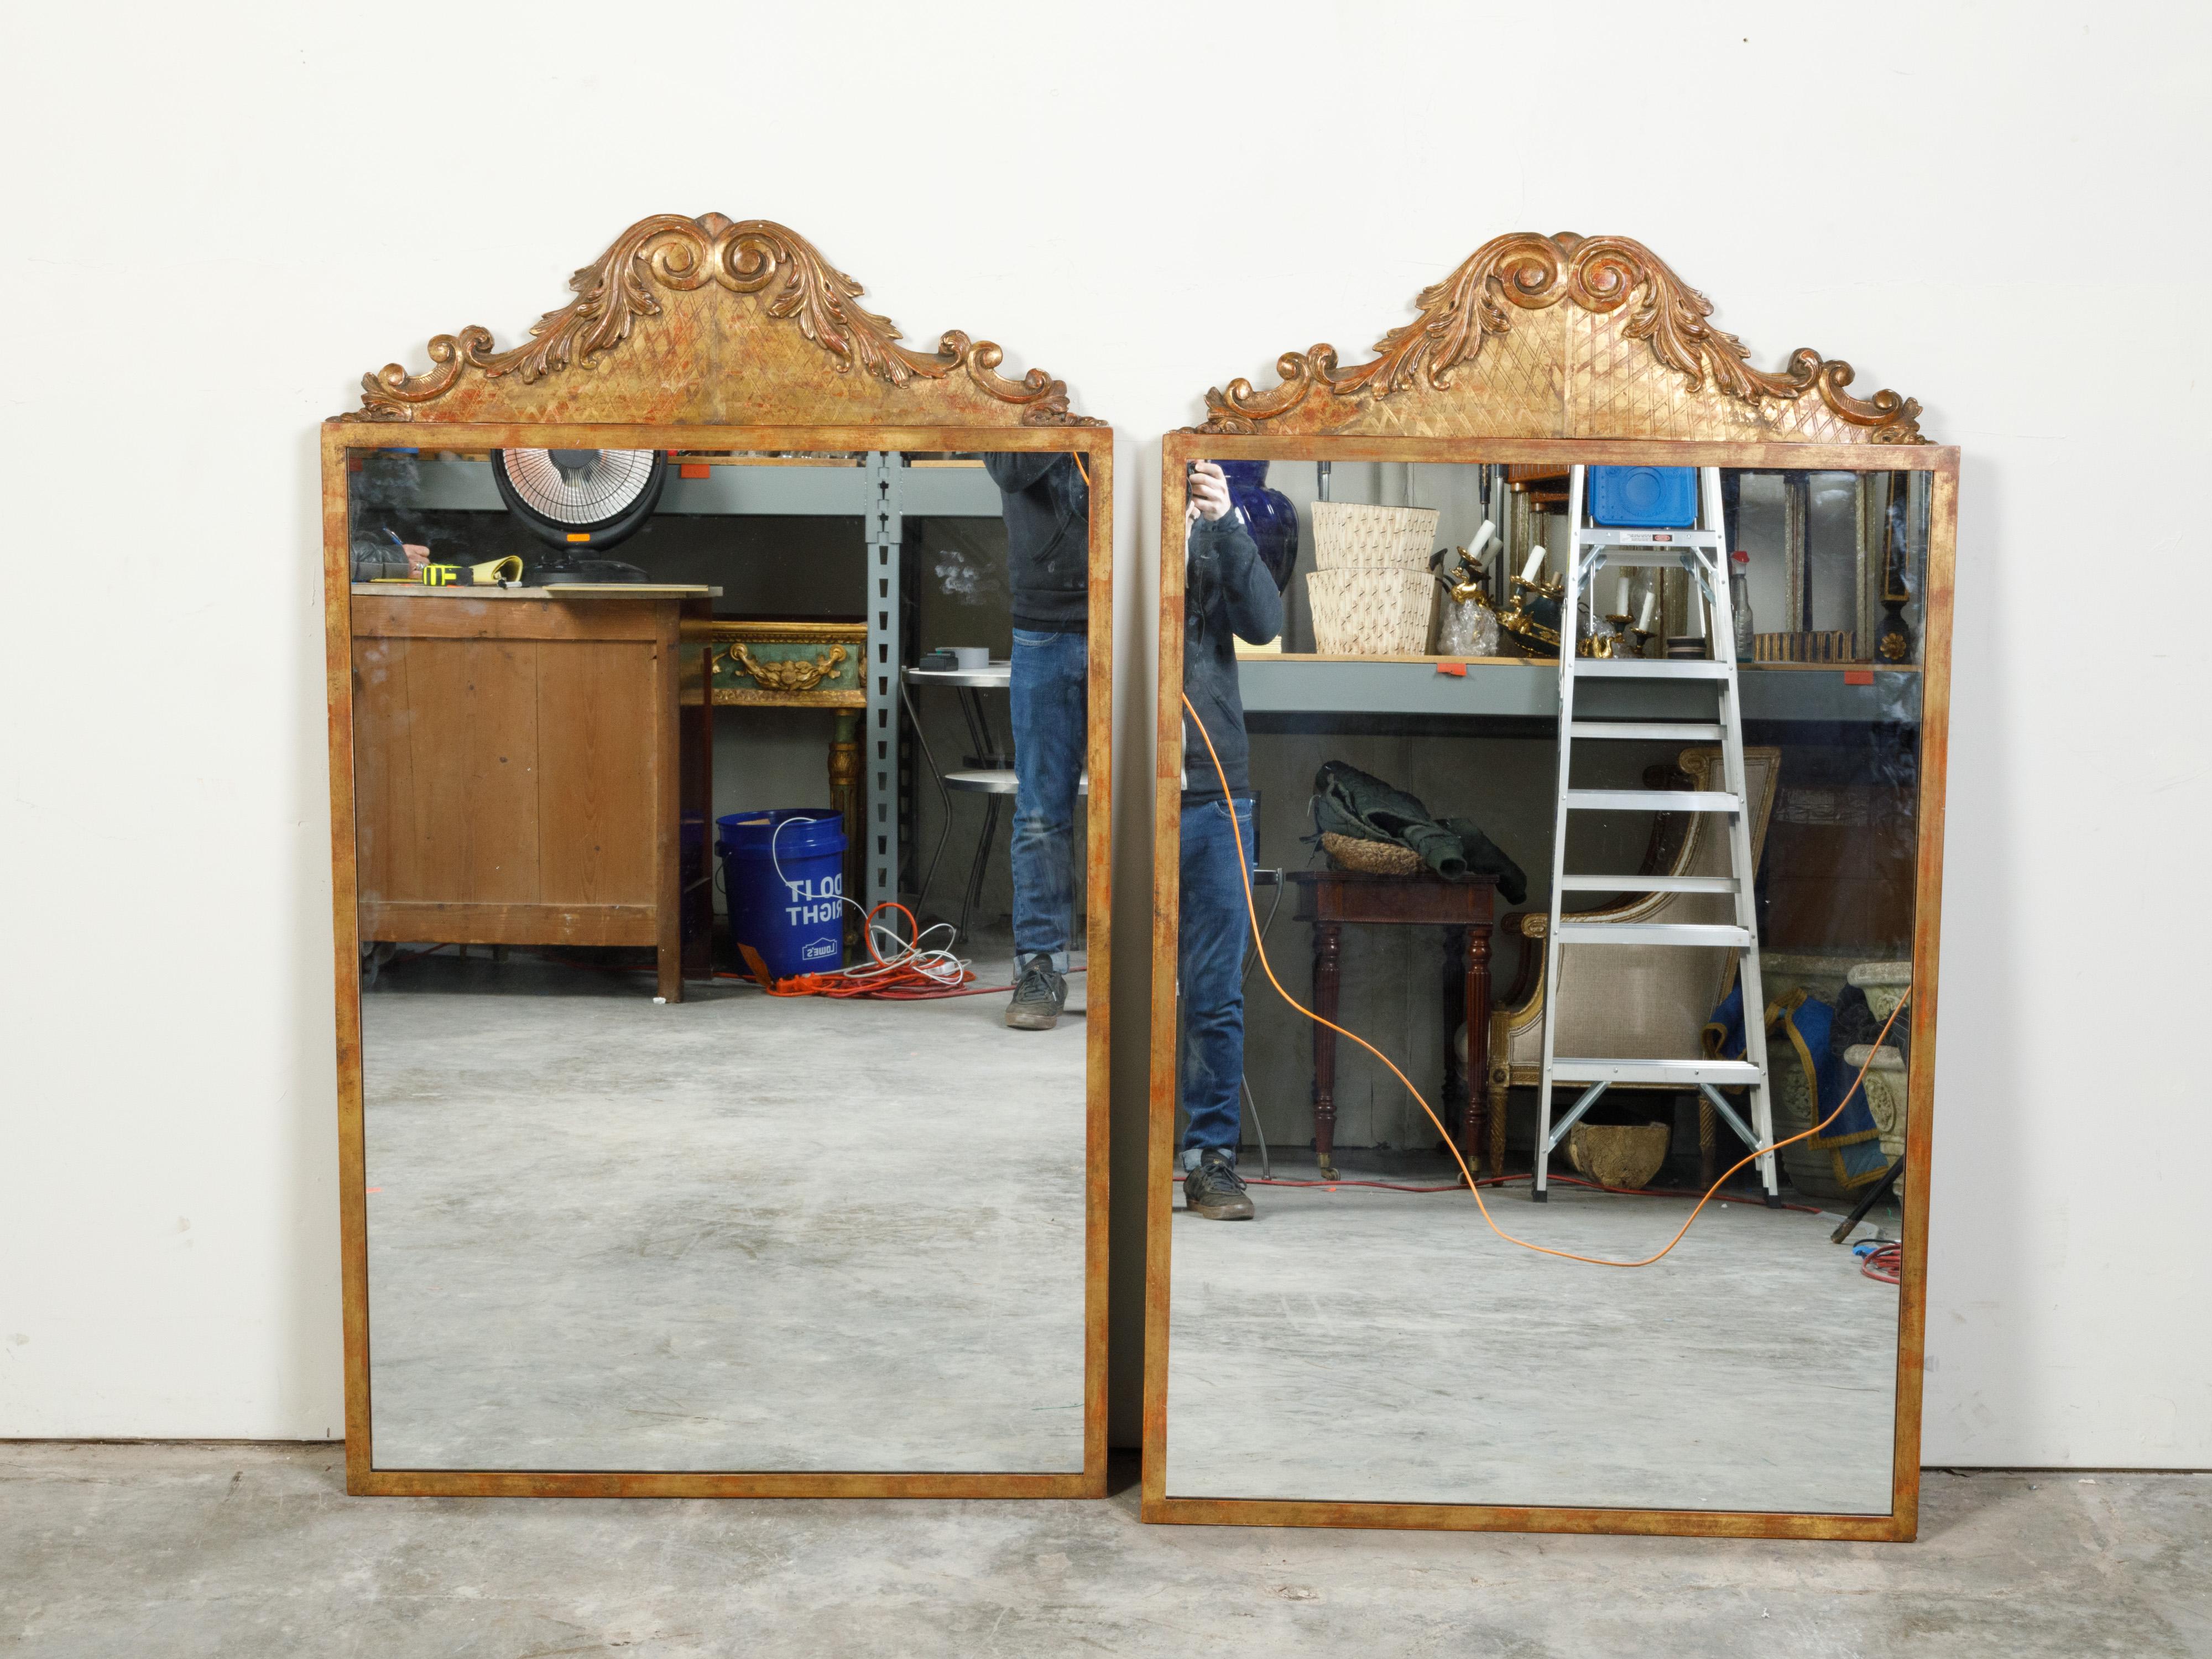 A pair of carved giltwood architectural fragments from the 19th century, mounted on custom gilt metal frames. This pair of mirrors, made of 19th century architectural fragments mounted on custom metal frames, draw our attention with their scrolling